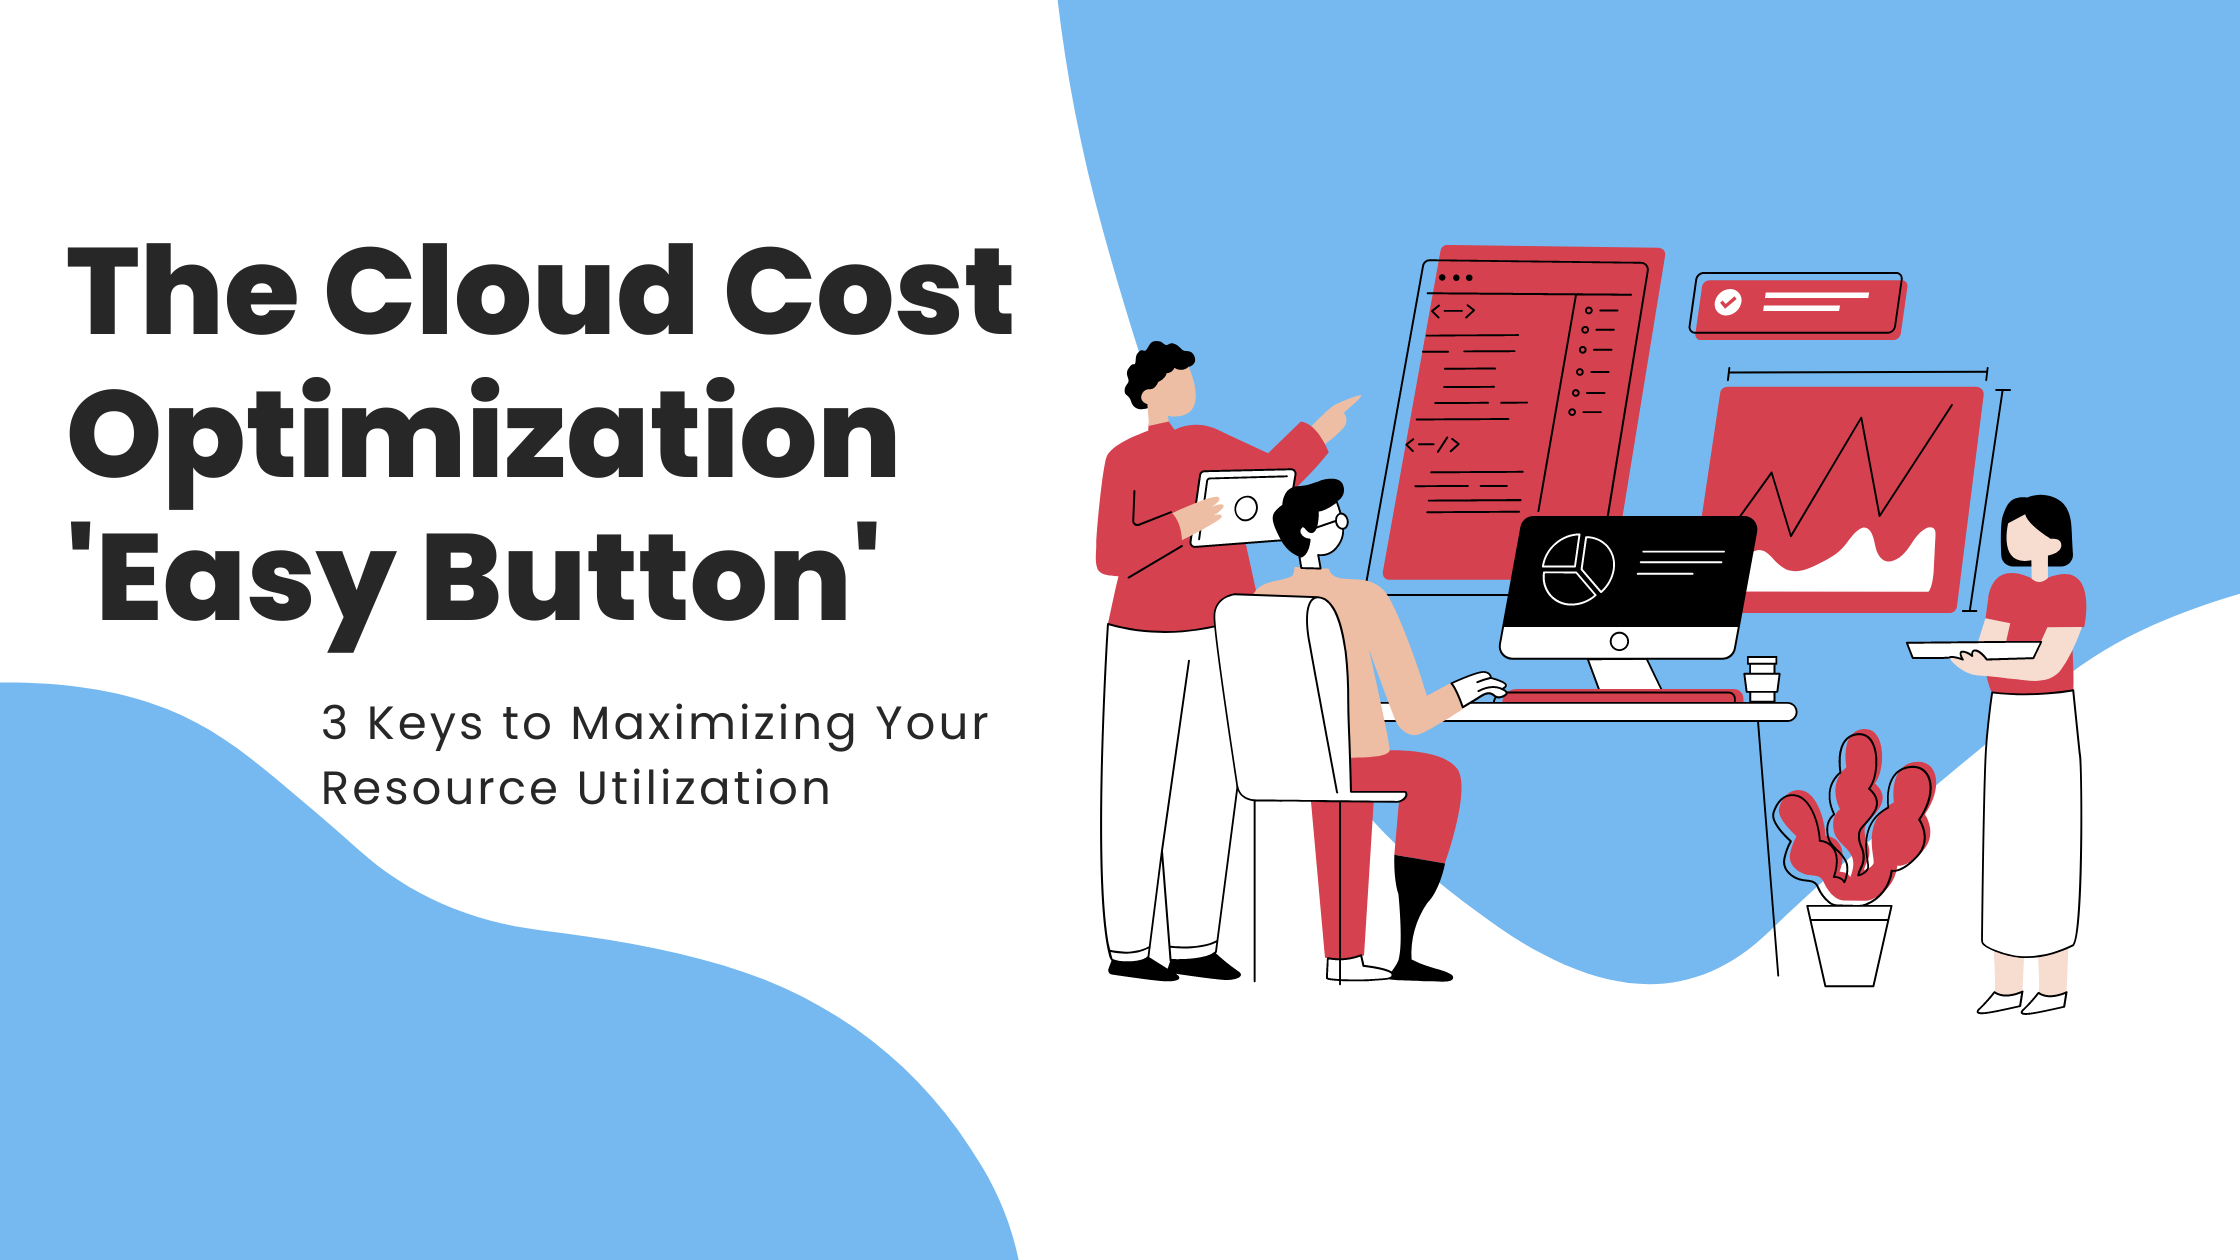 The Cloud Cost Optimization ‘Easy Button’: 3 Keys to Maximizing Your Resource Utilization